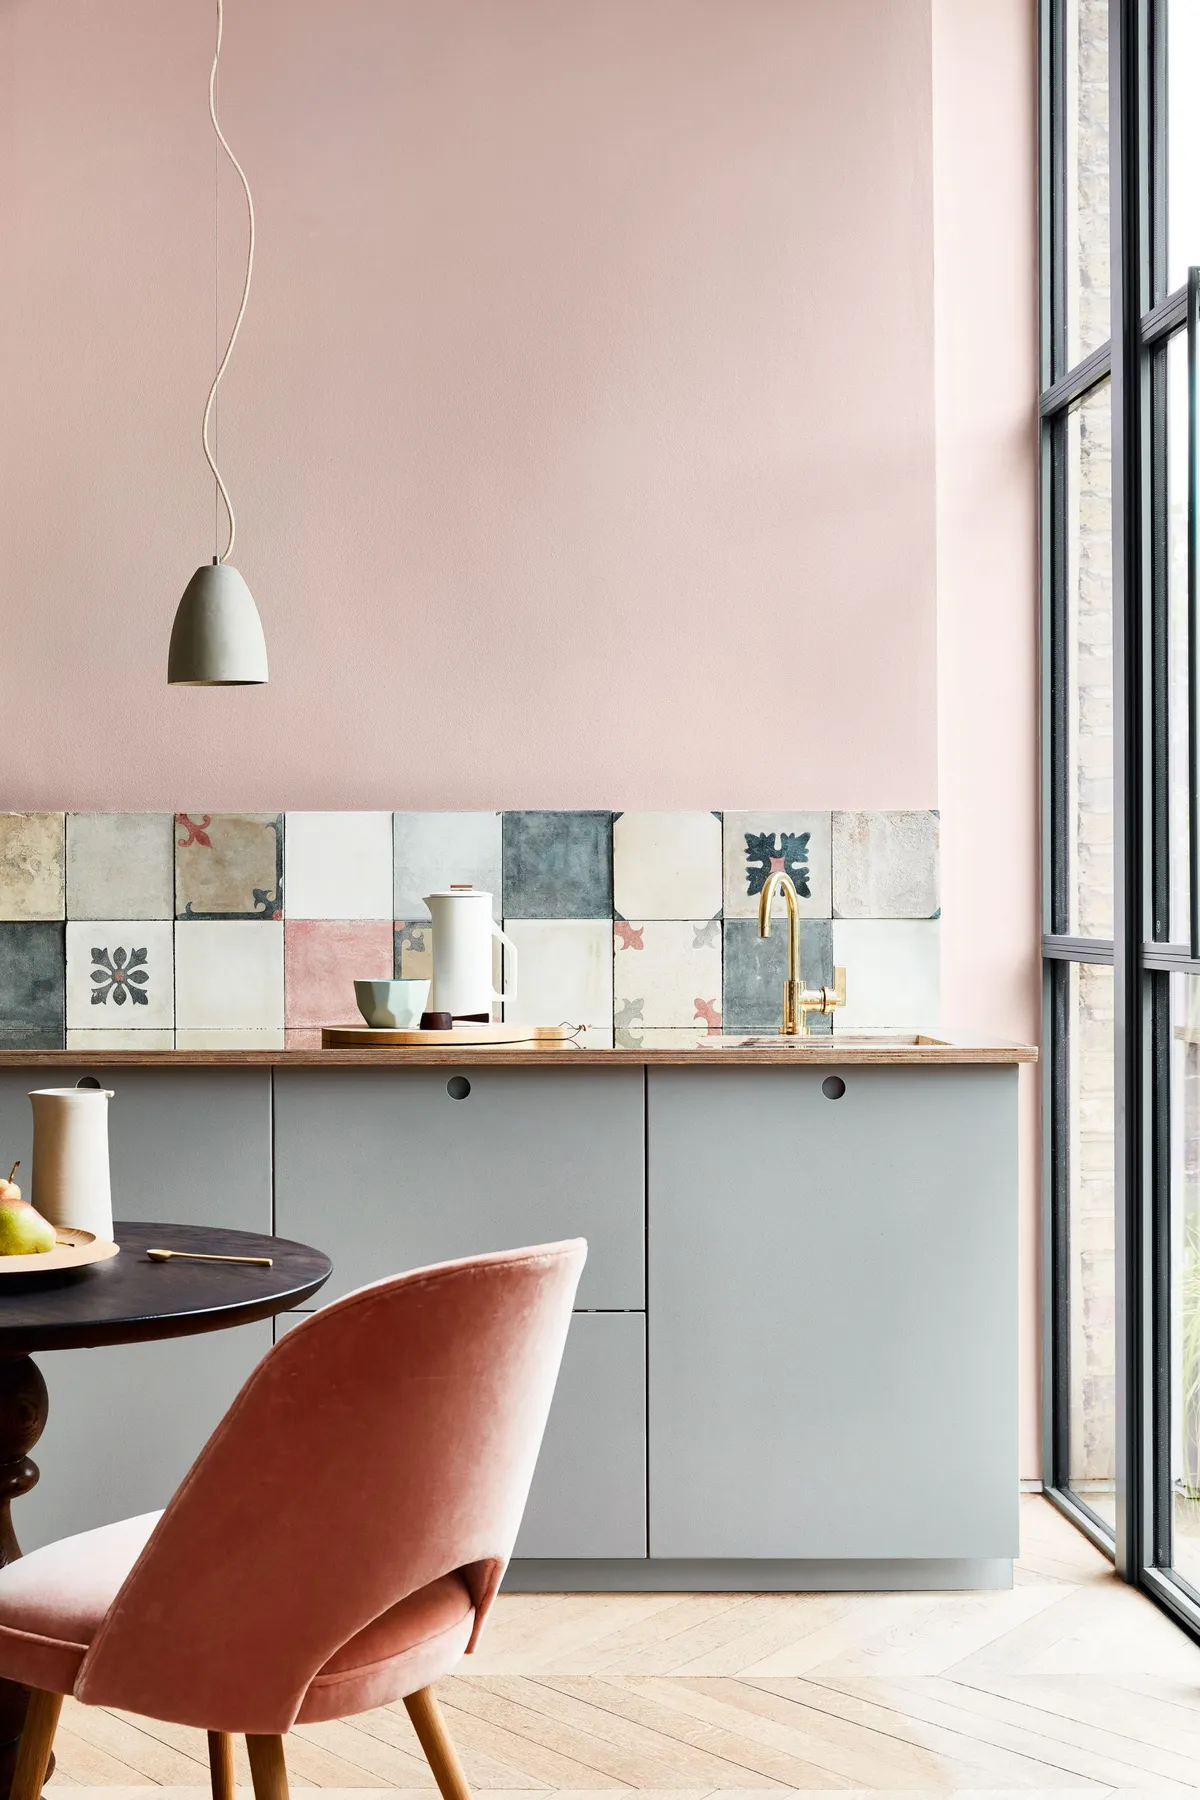 Wall painted in Light Peachblossom, from £47 per 2.5l, Little Greene.